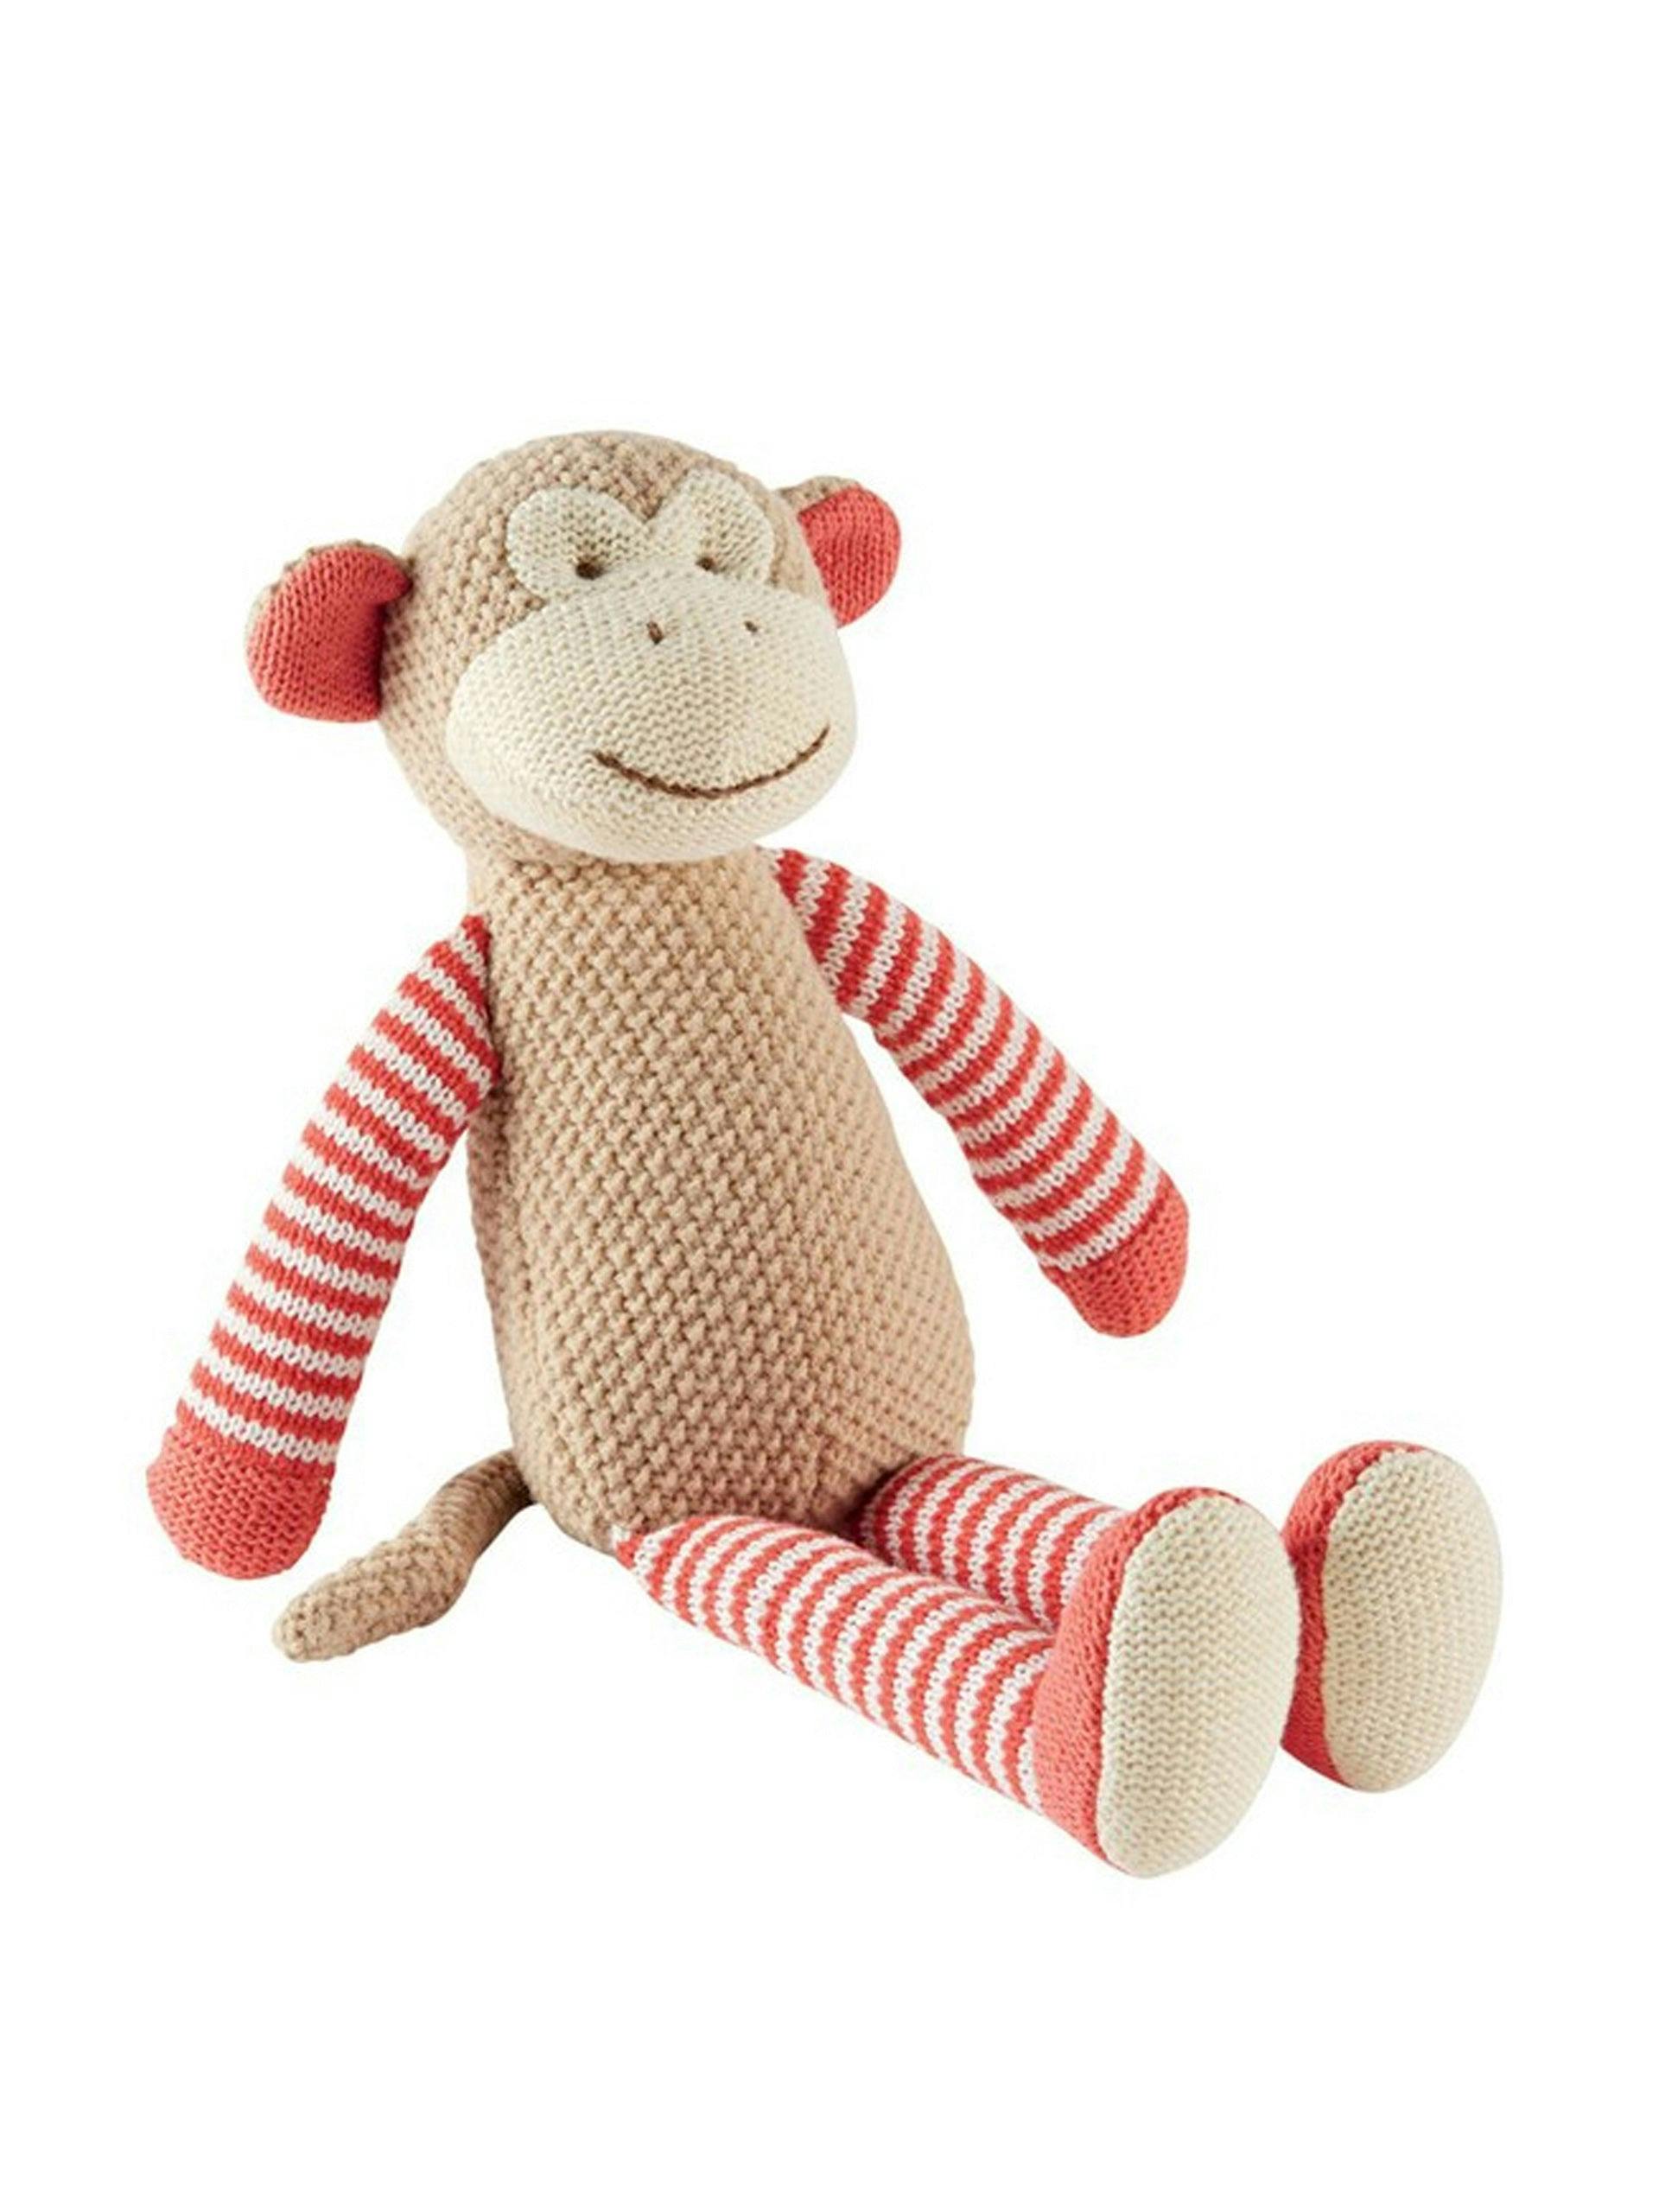 Knitted monkey